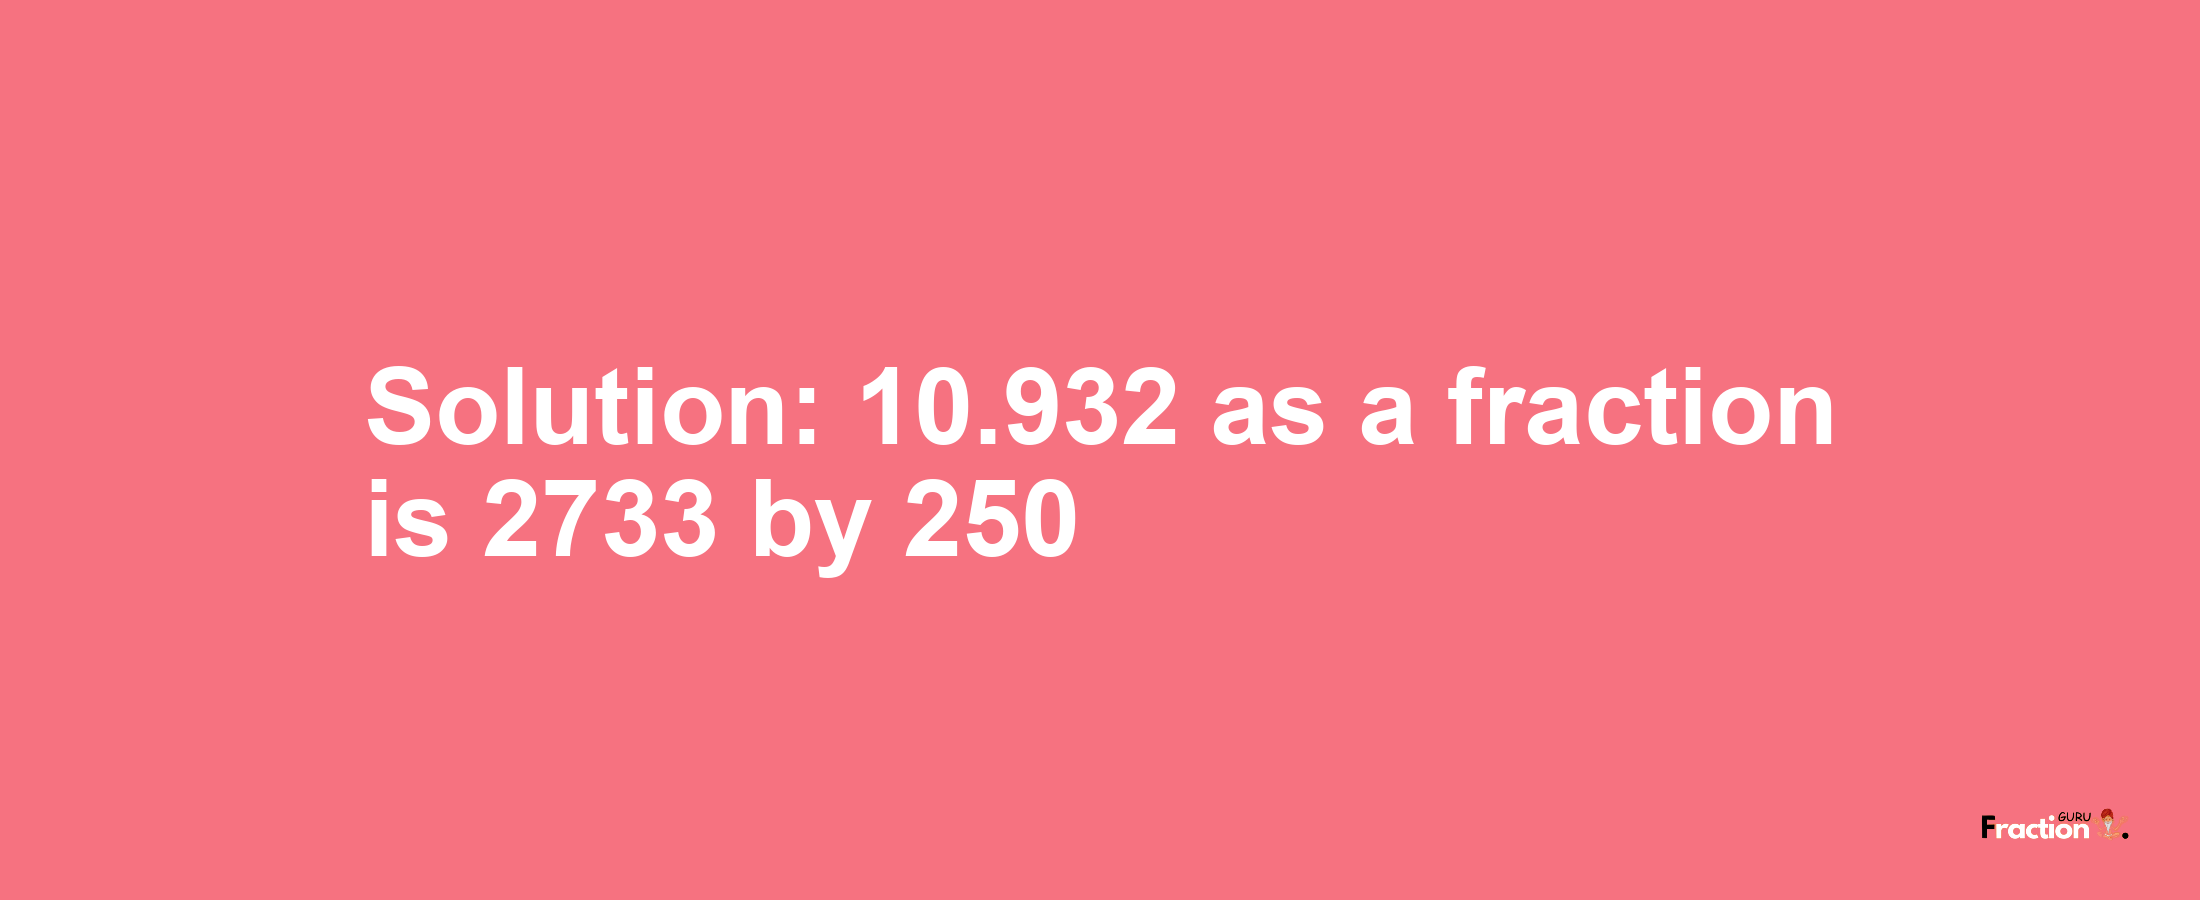 Solution:10.932 as a fraction is 2733/250